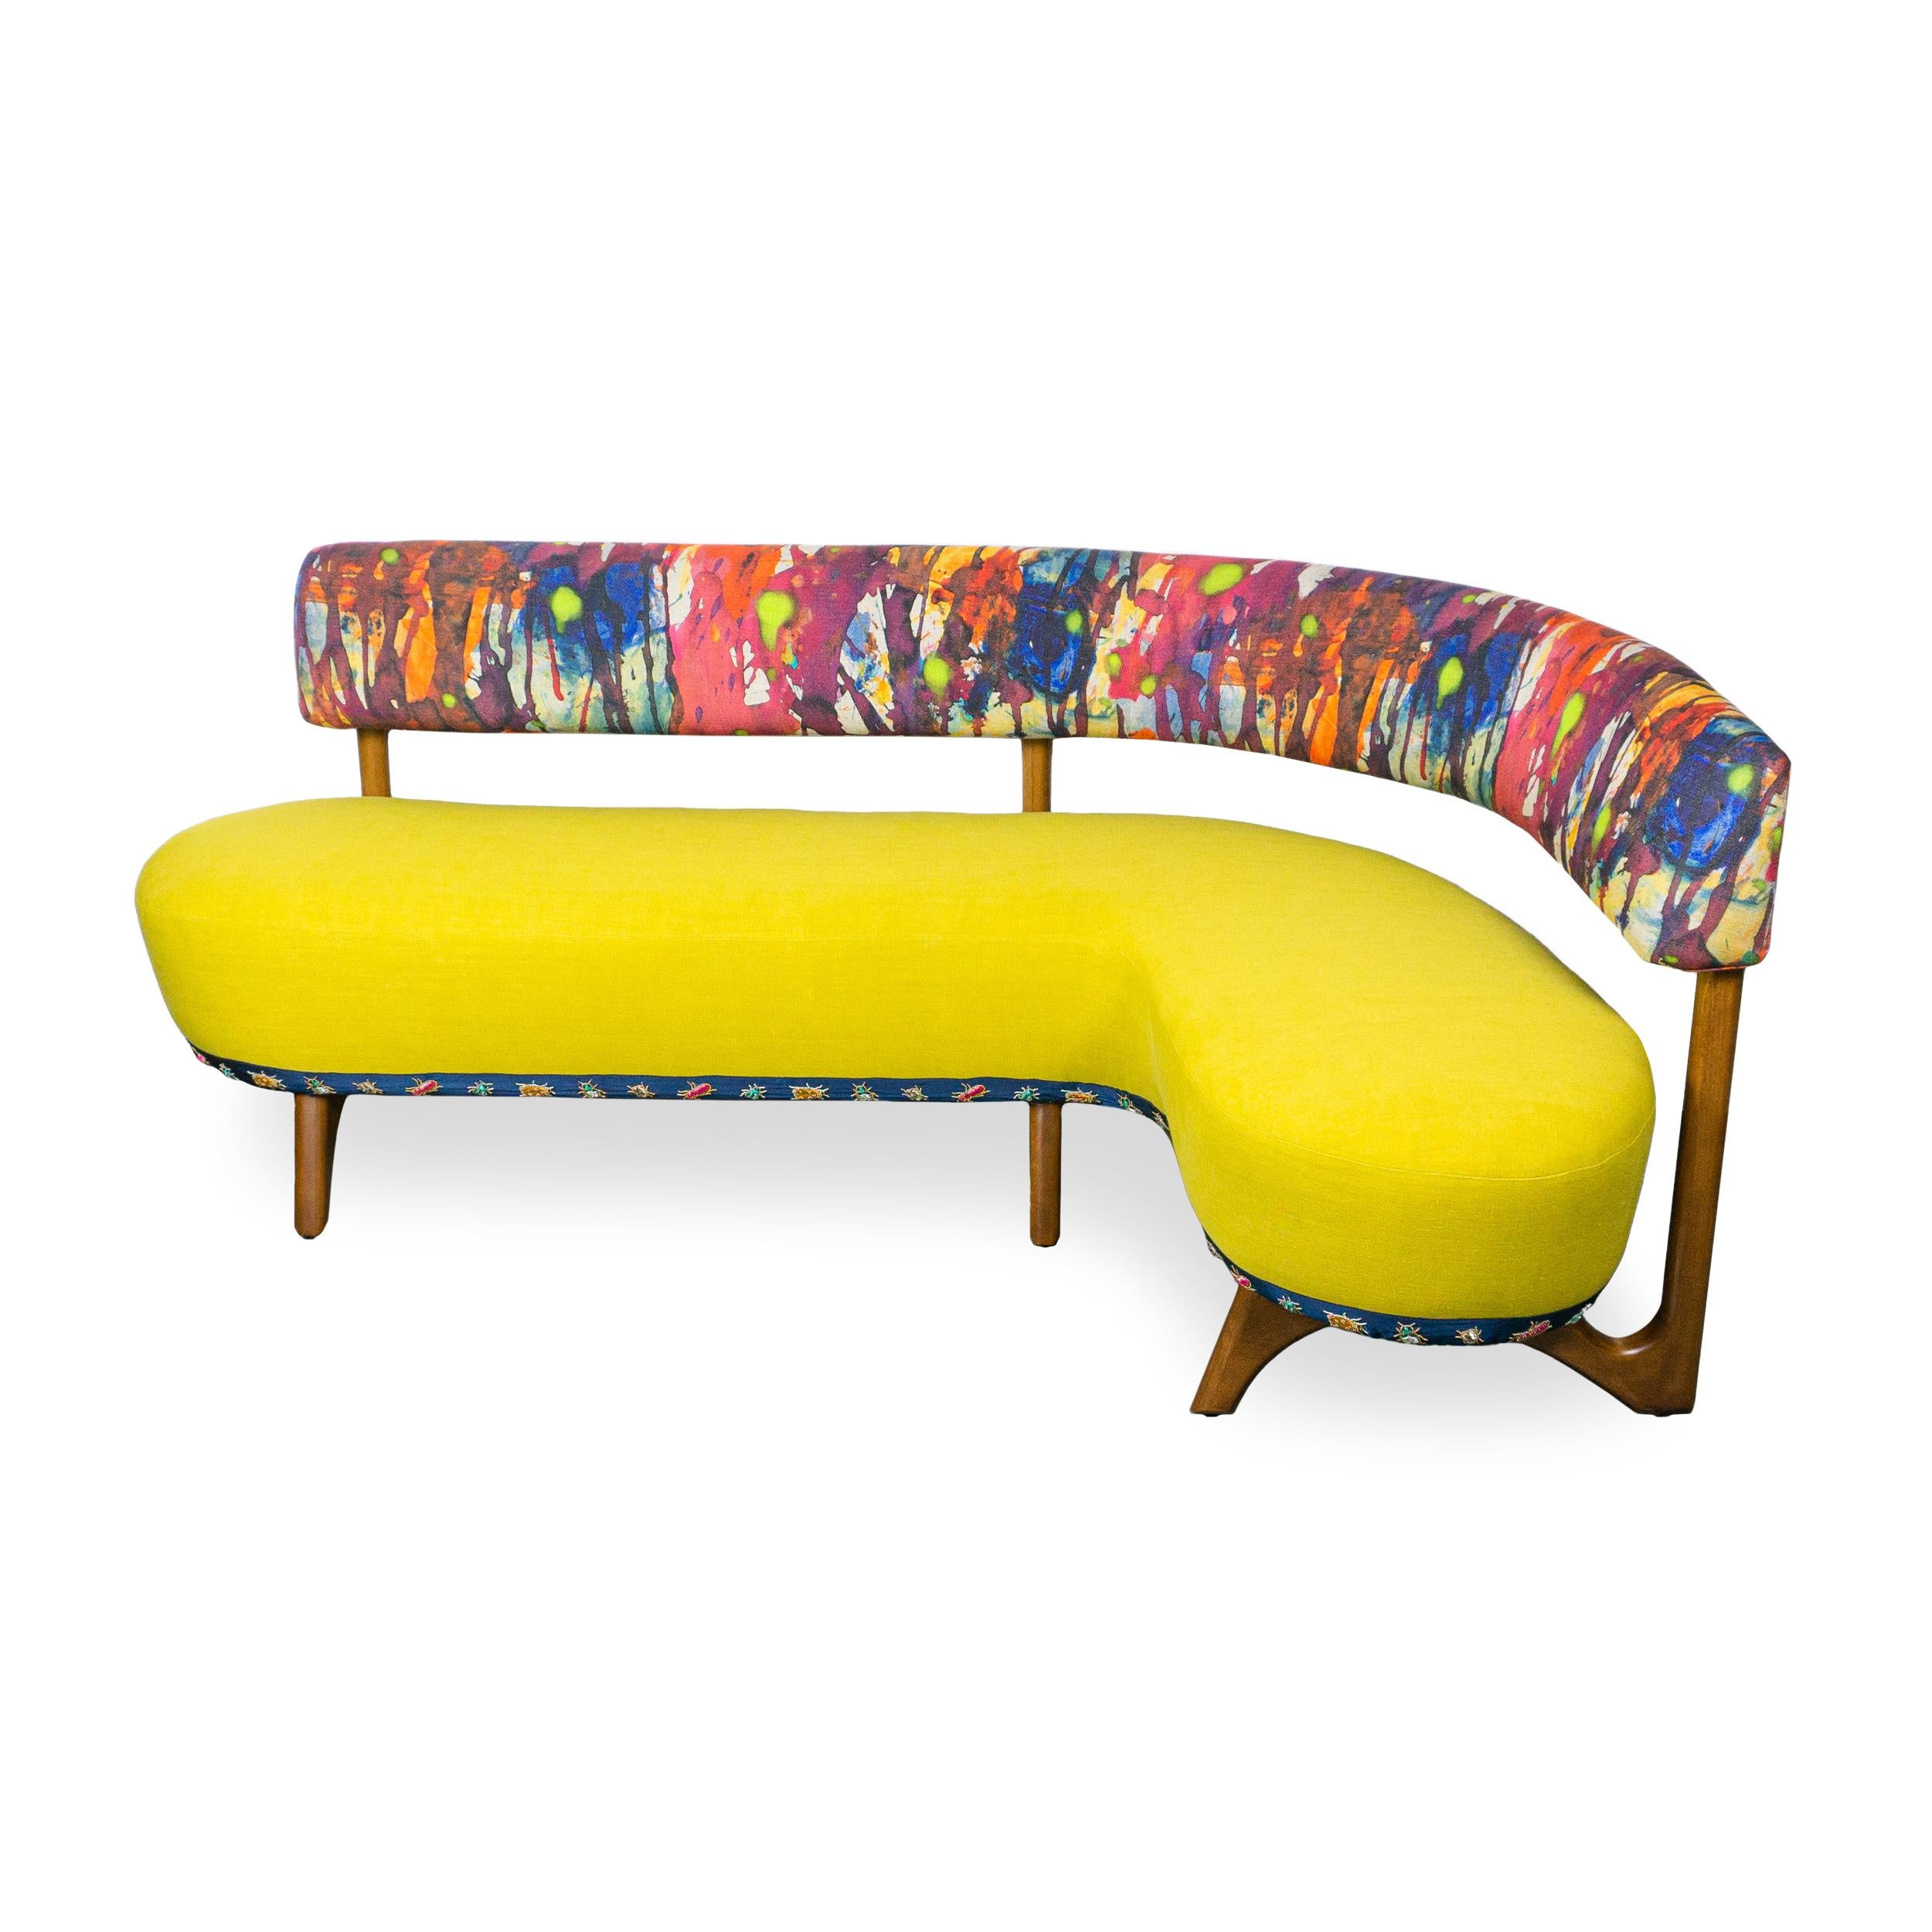 Dimensions, fabric and finish are customizable, just ask.
L-shaped banquette with exposed wood frame (maple) and upholstered with a multicolor watercolor linen on back rail and yellow linen on seat, plus embroidered beaded insect trim along base.